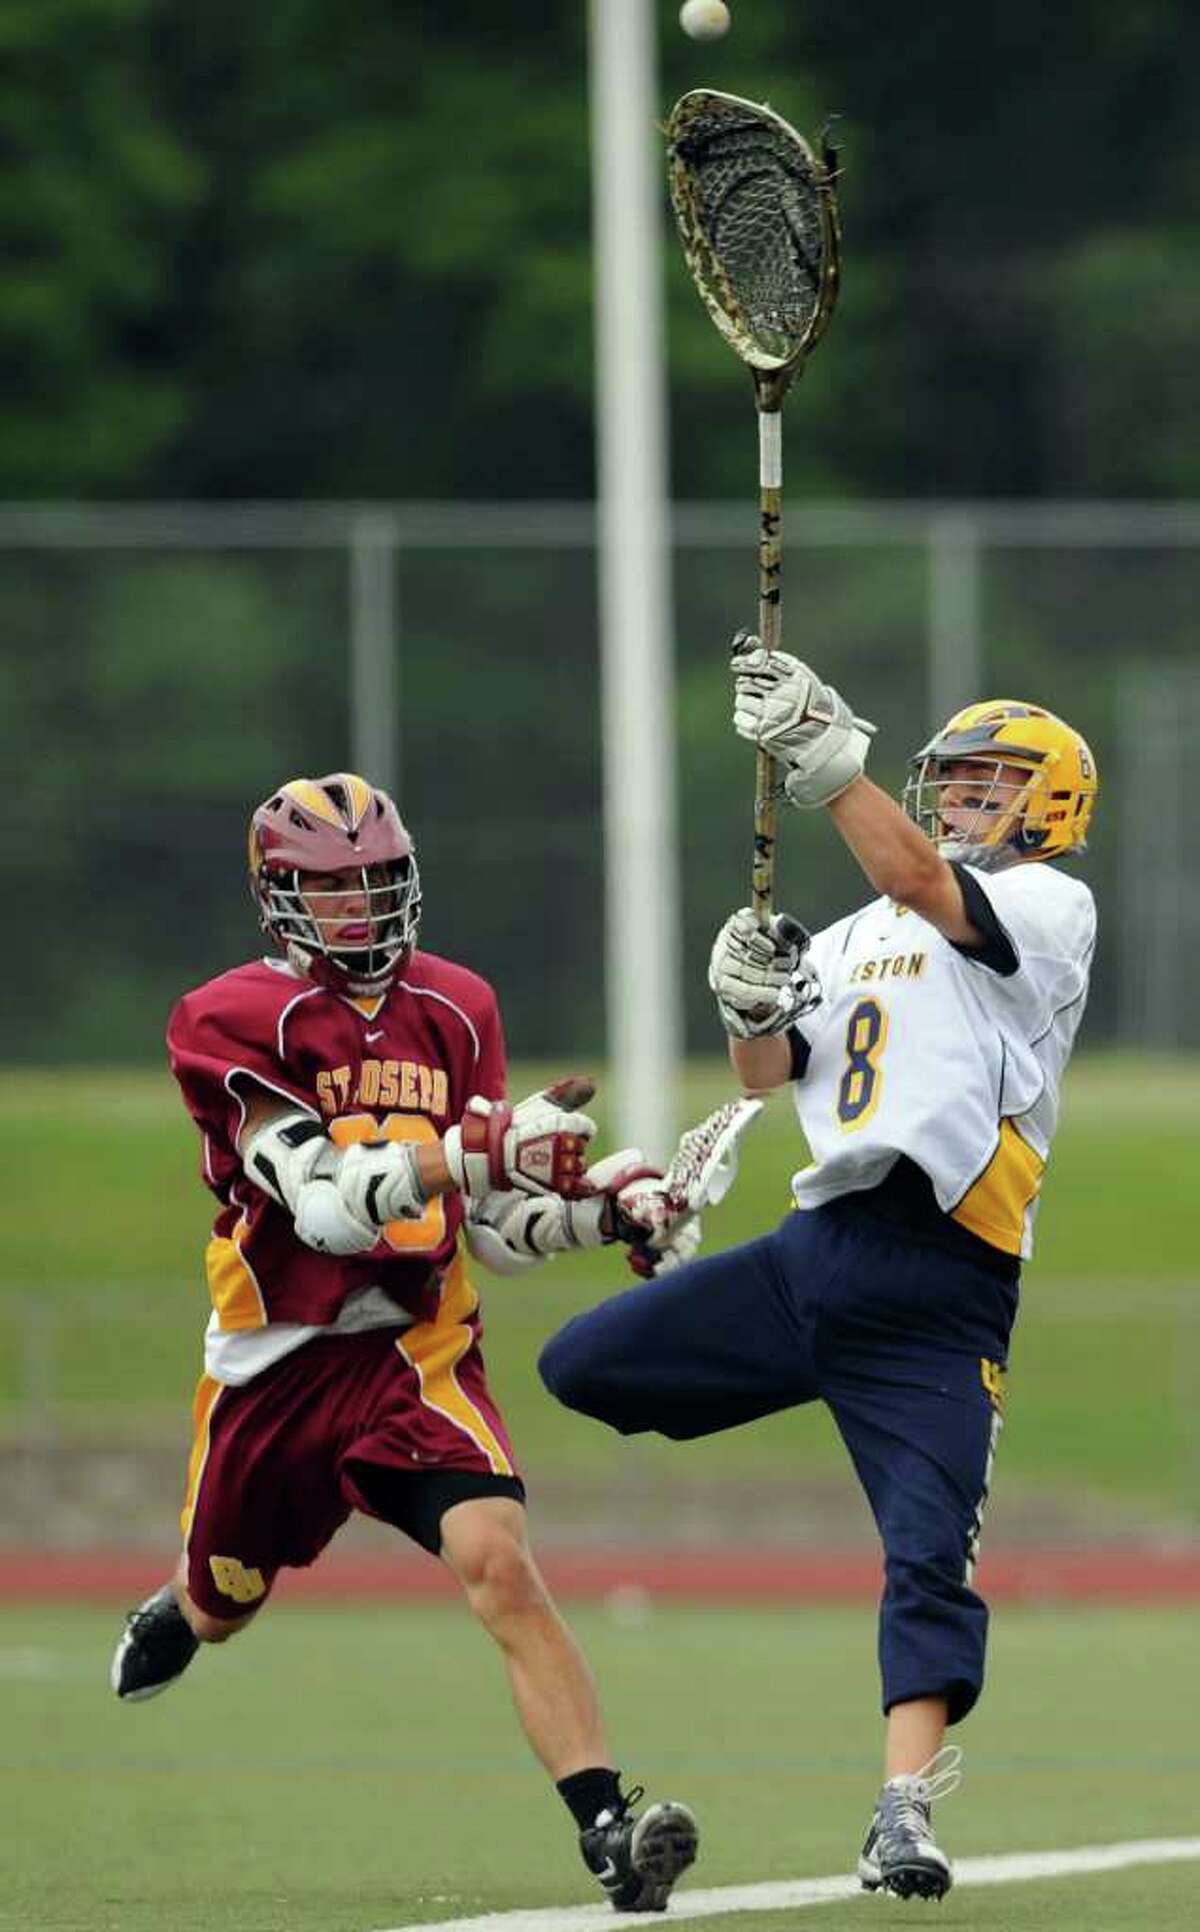 Weston goalie Alex Peyreigne makes a save in the 2010 Class S championship game against St. Joseph. The Trojans won the Class S title on June 12, 2010 with a 7-6 victory over St. Joseph.